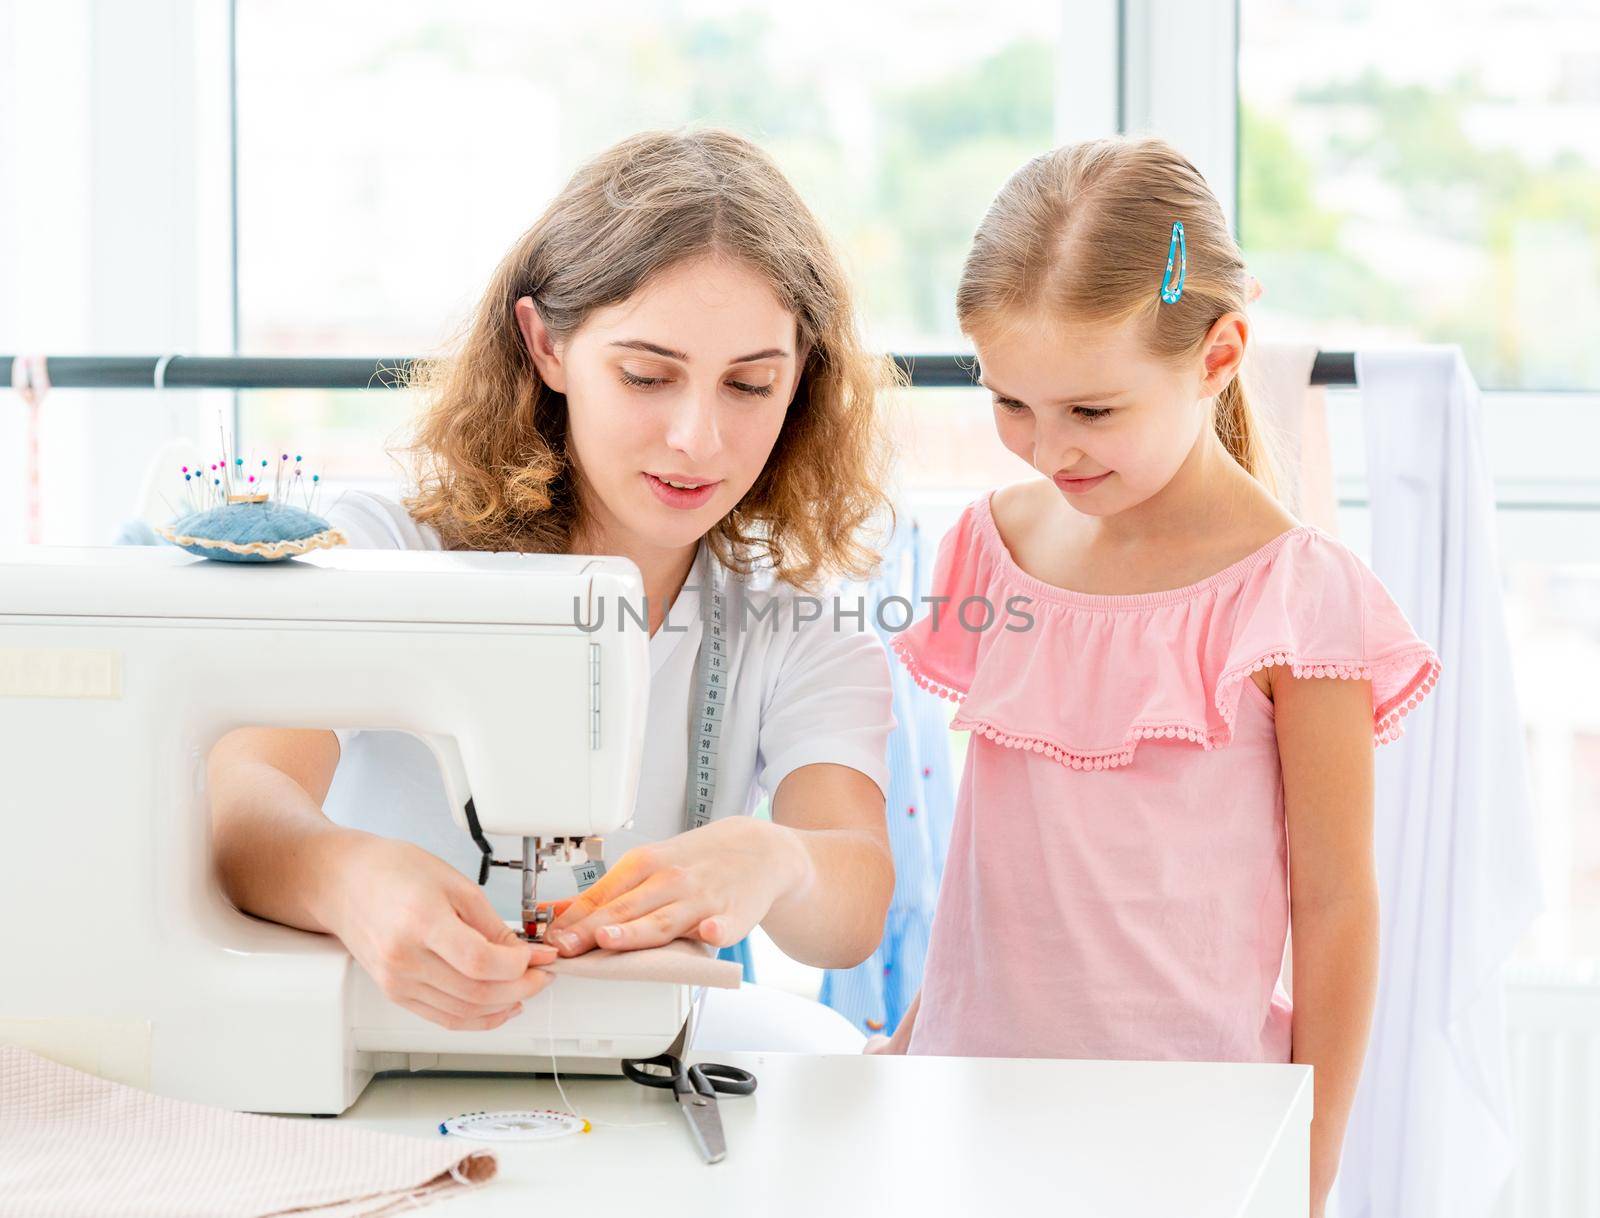 Little girl is taught to sew by teacher at class